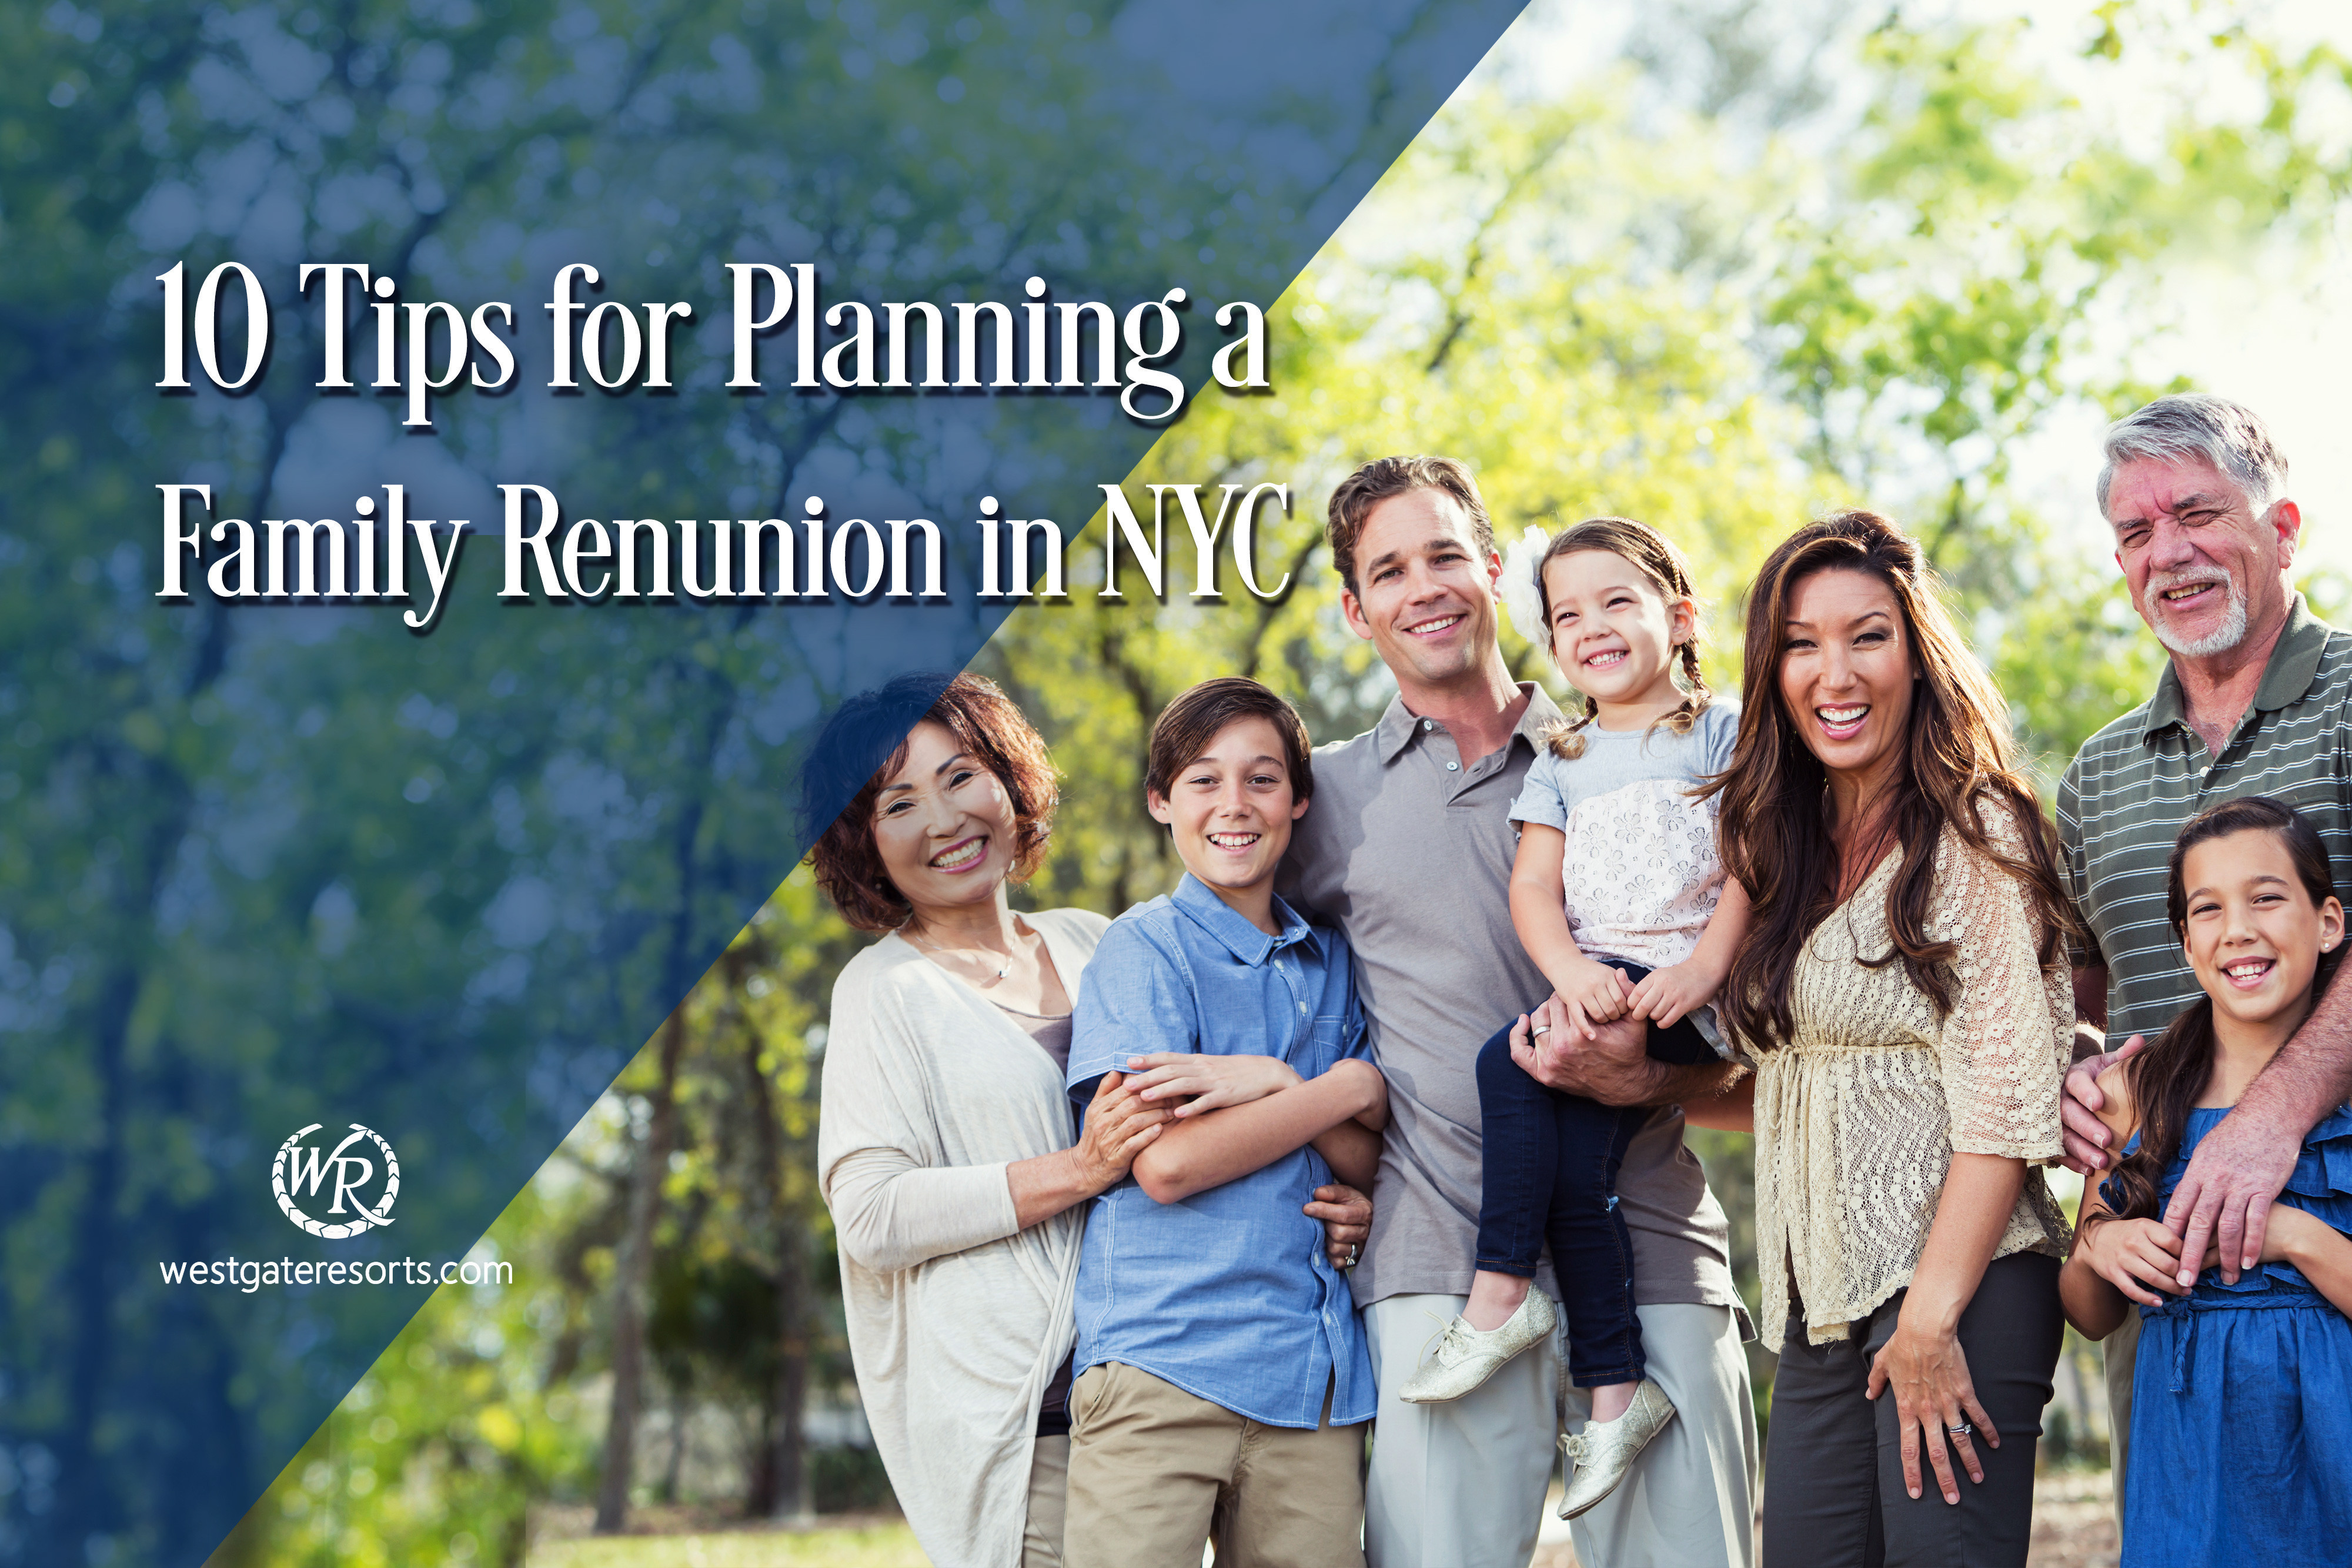 10 Tips for Planning a Family Reunion in NYC